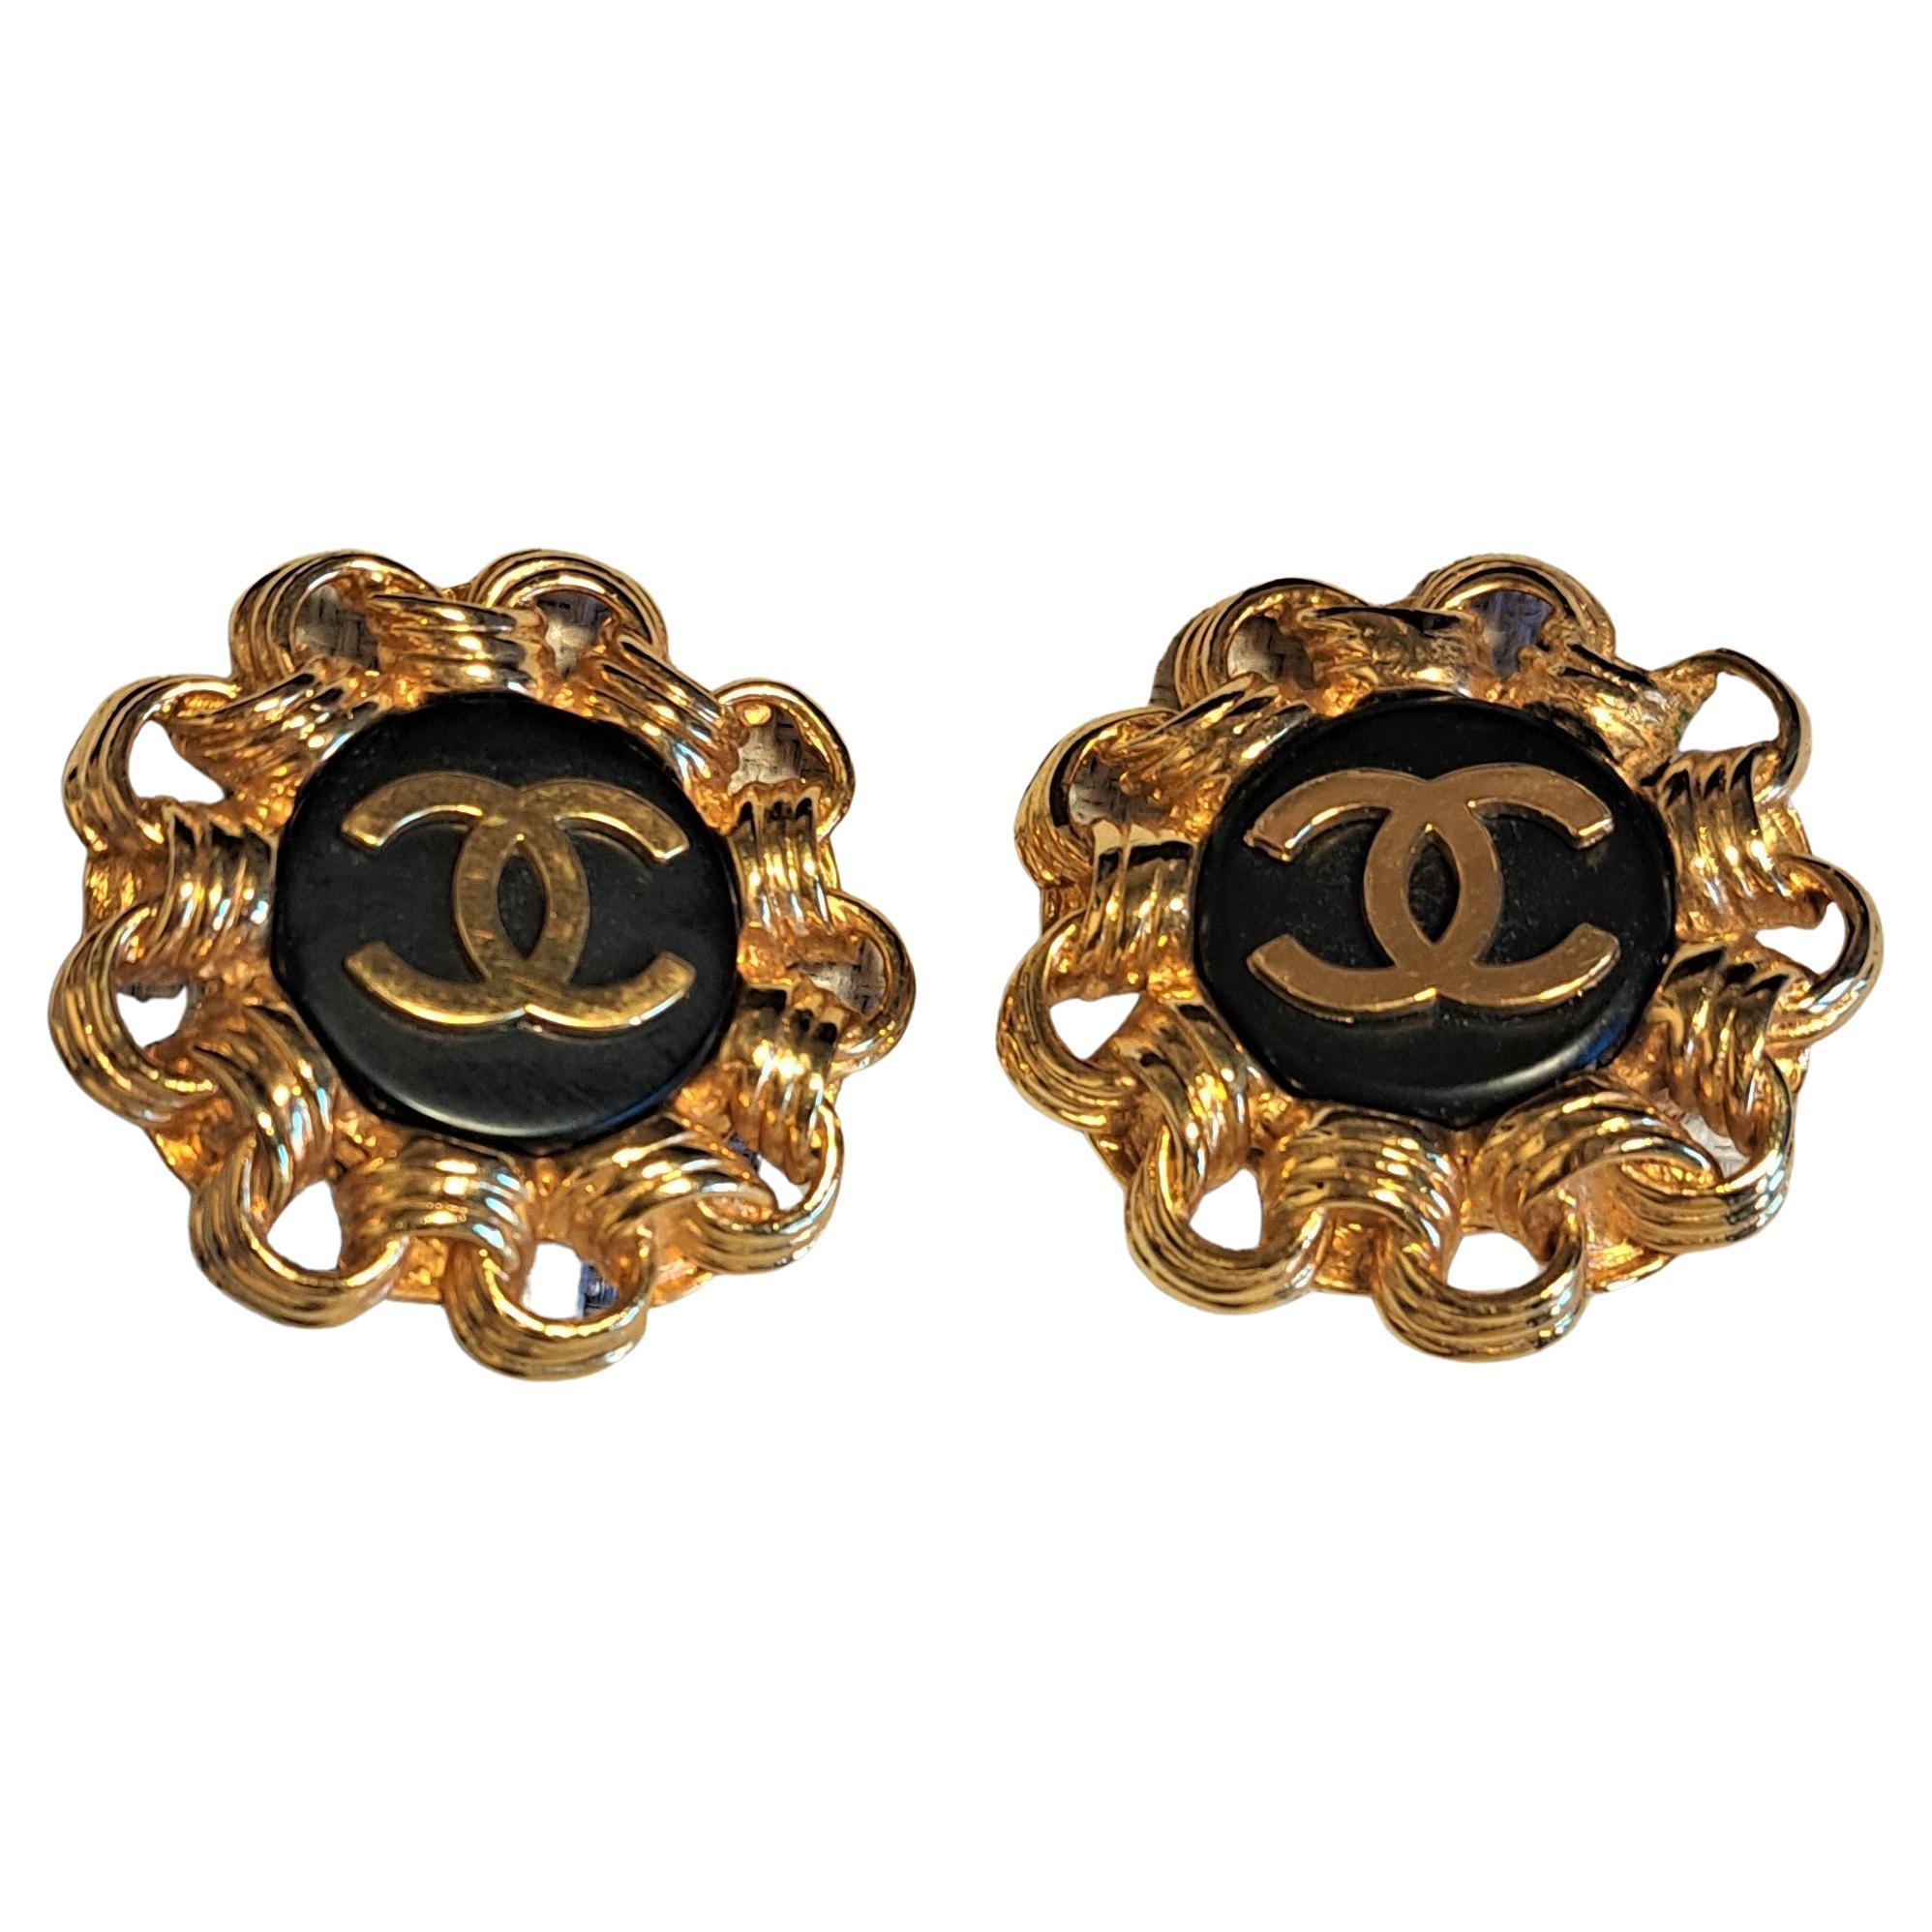 Vintage CHANEL Coco Logos Heart Earrings Gold Accessory 2 Rare F/S